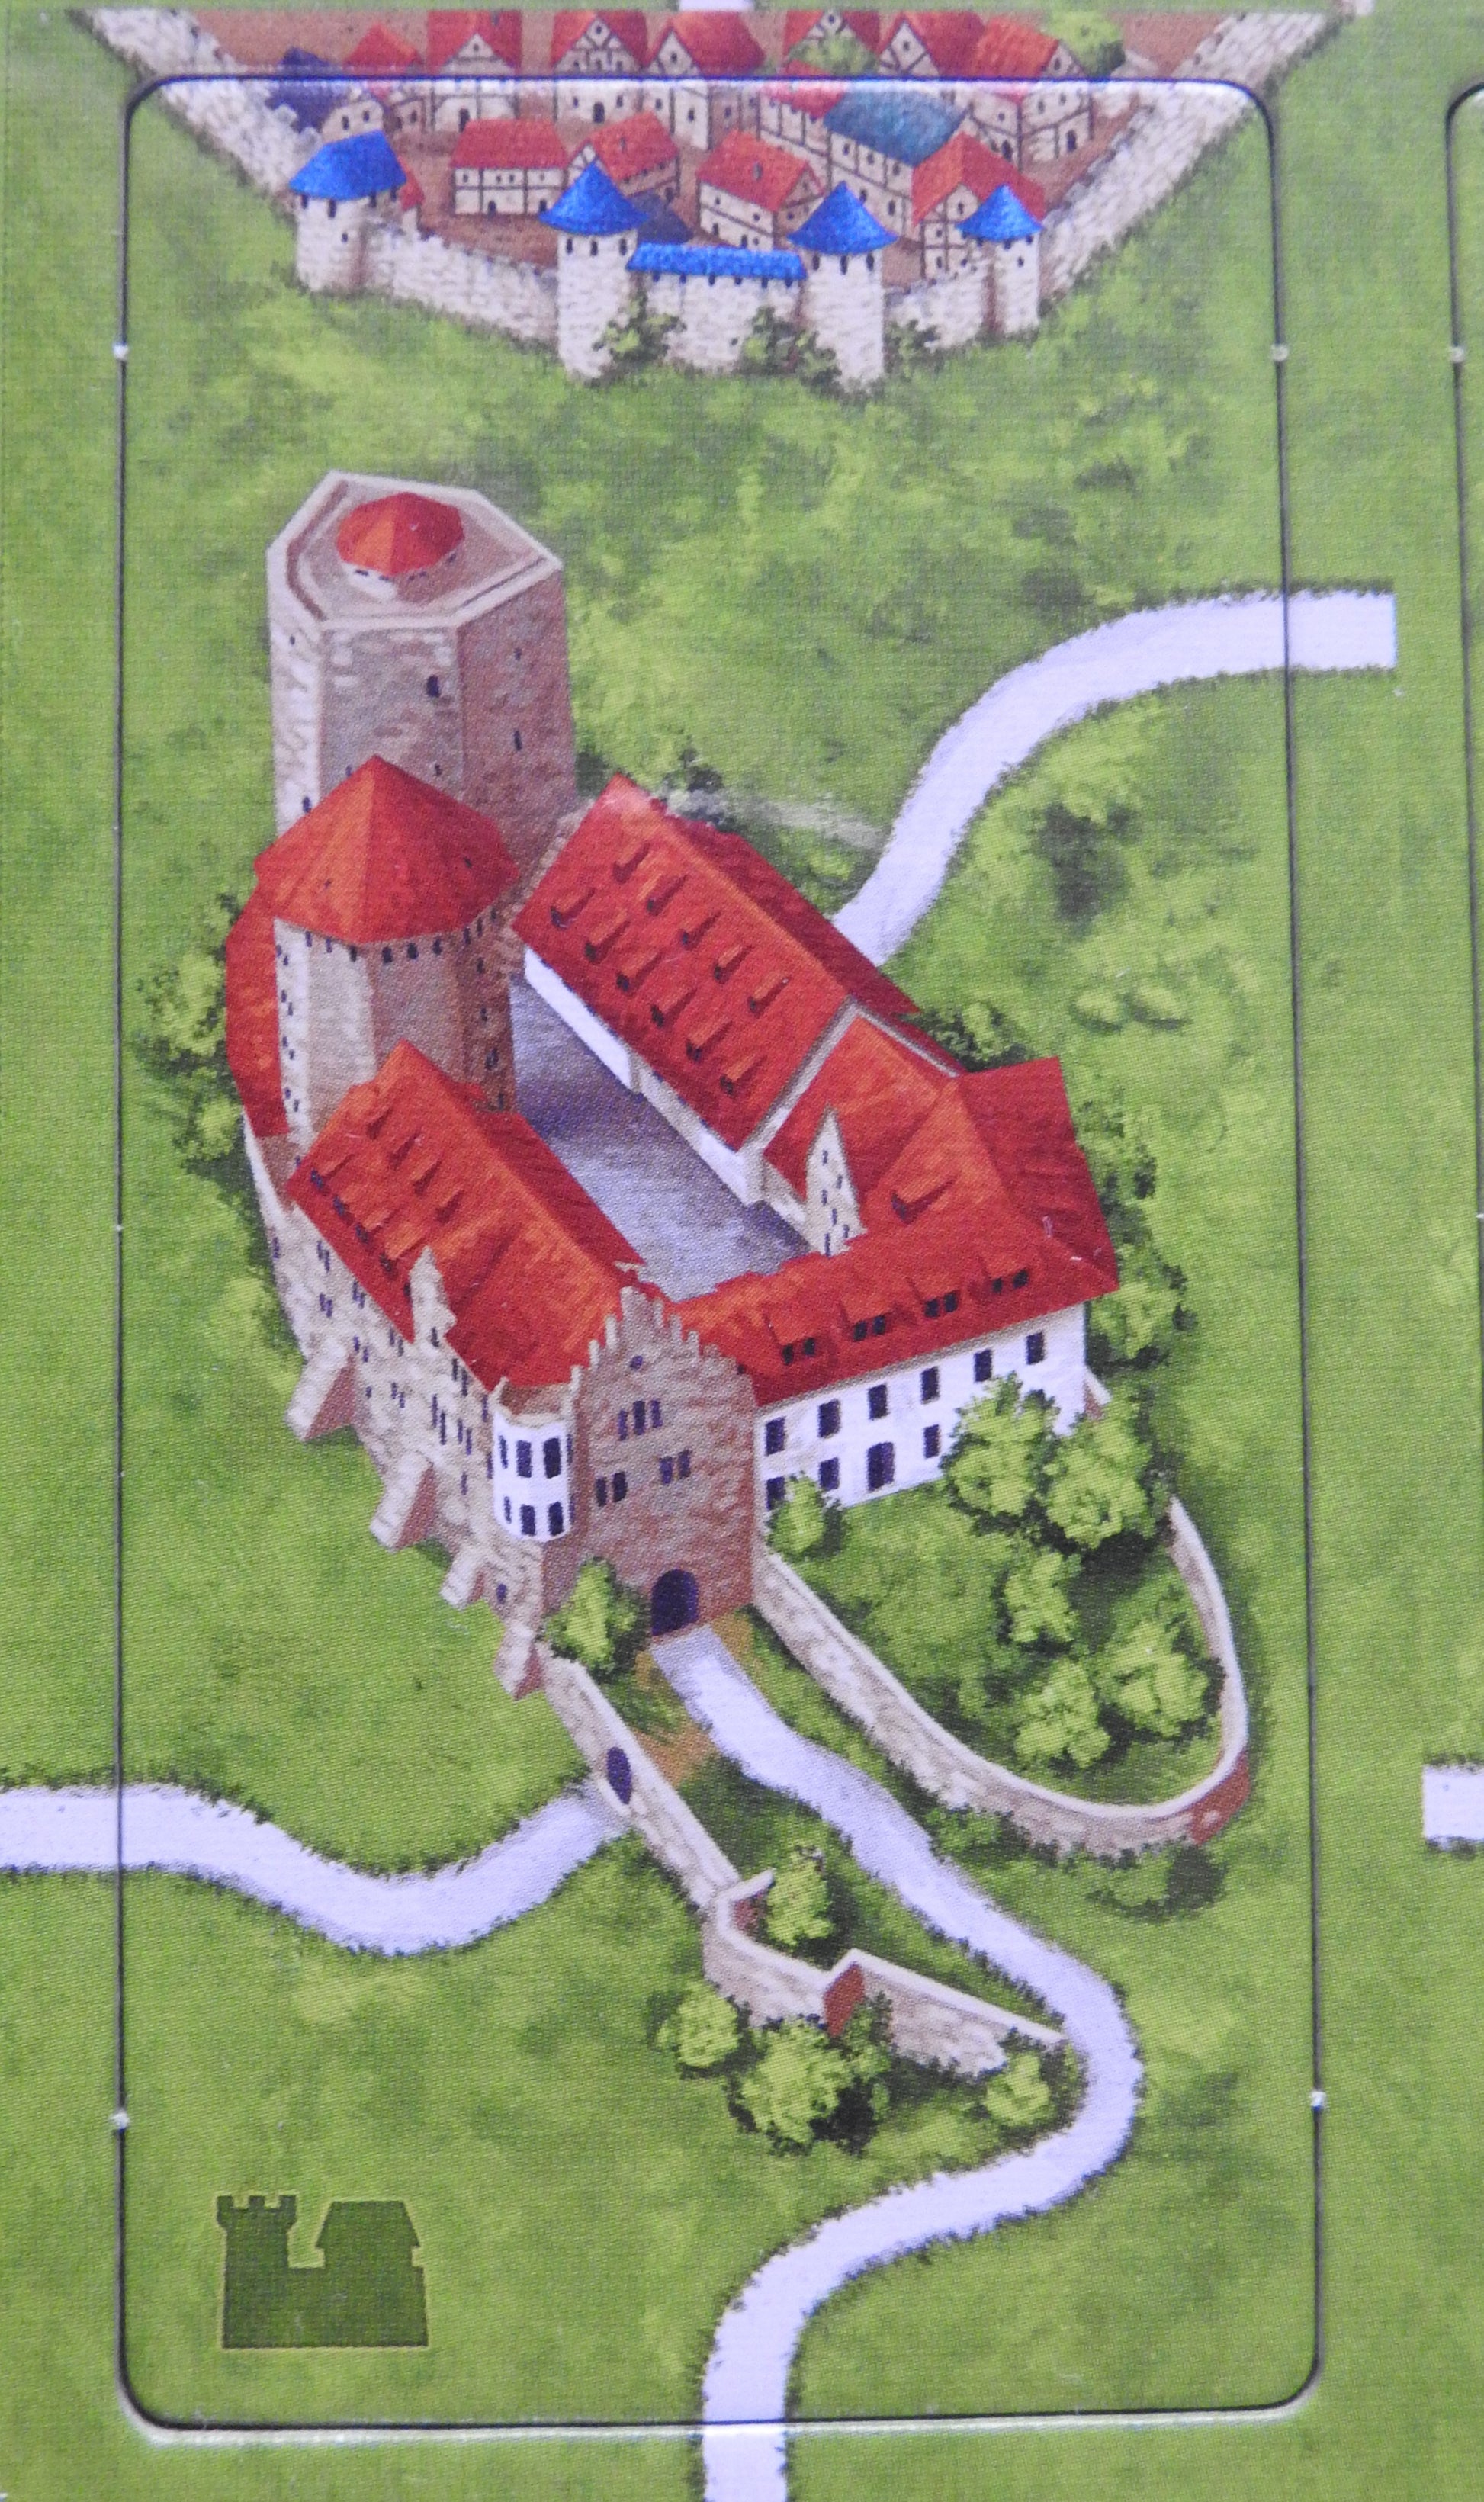 Close-up view of a red-roofed castle tile in this Carcassonne German Castles mini expansion.